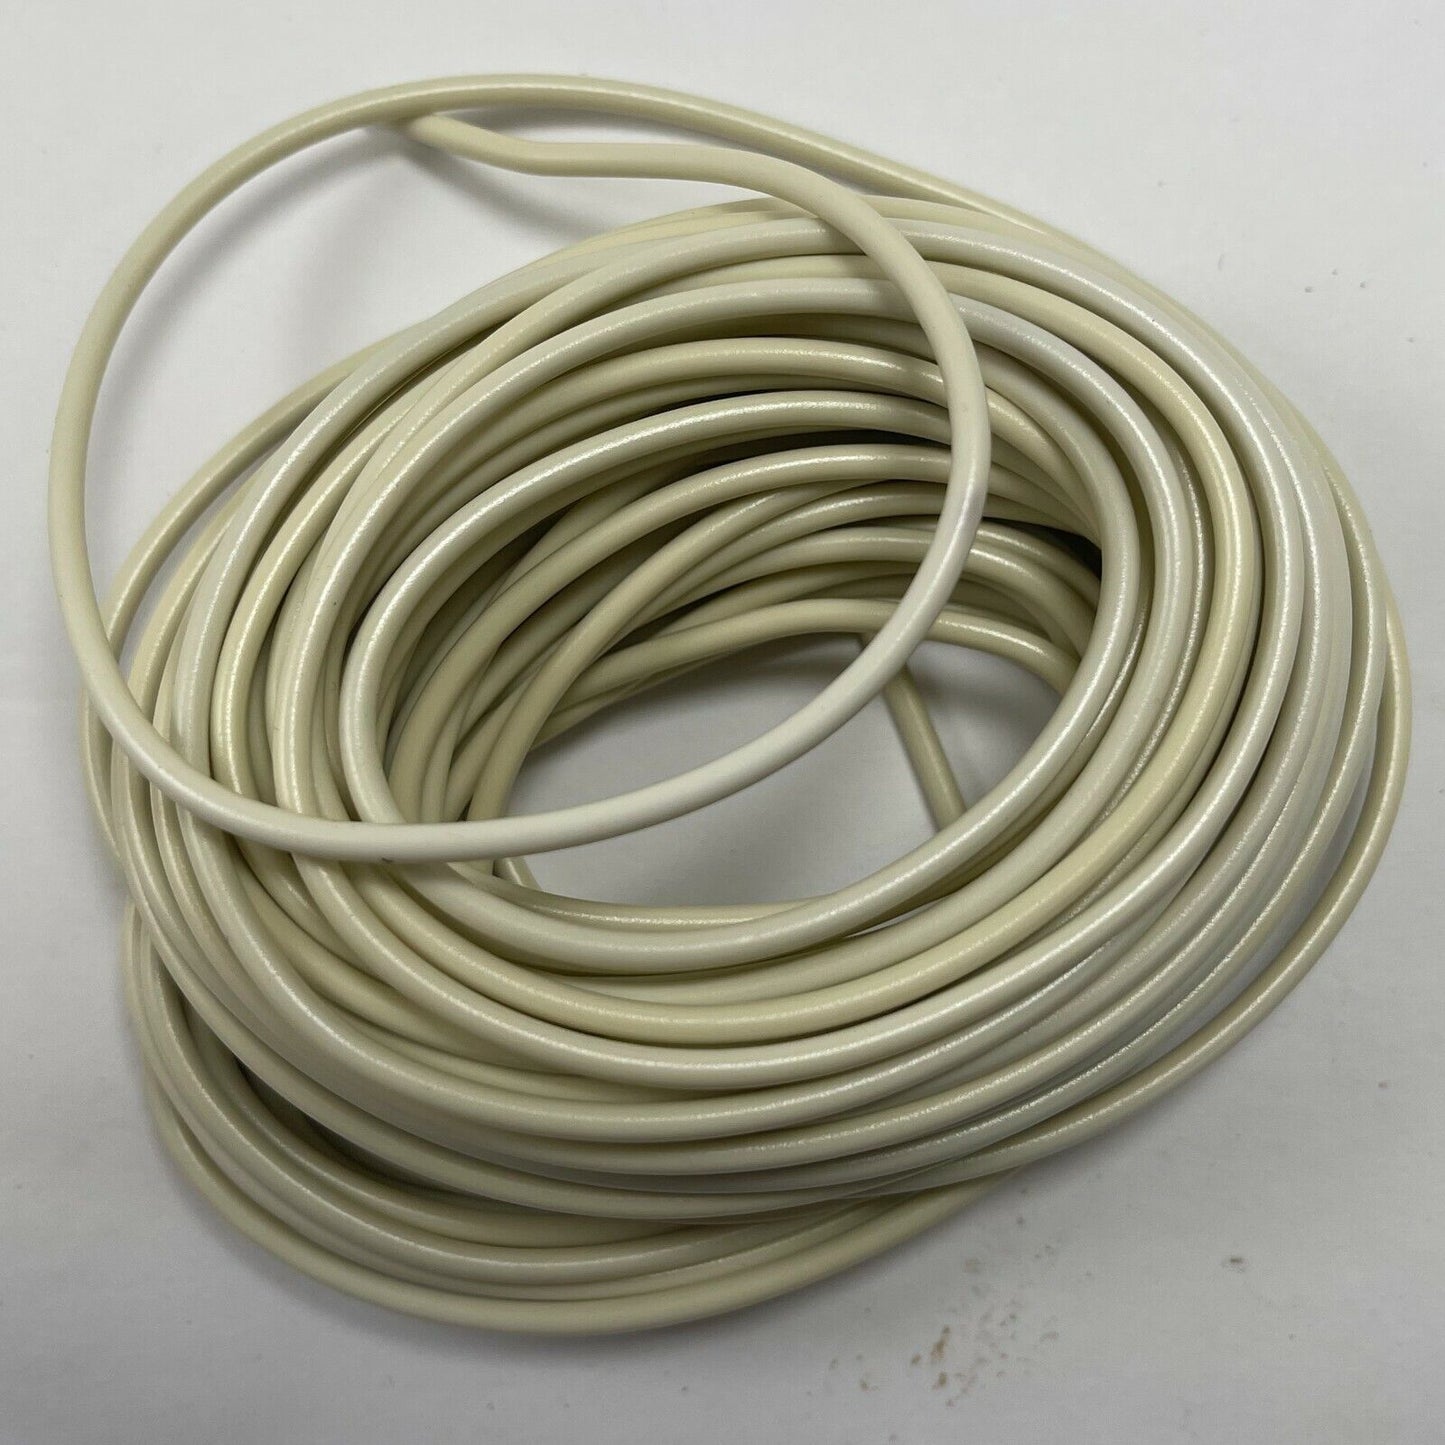 2 Pack of Automotive Primary Wire 12 Gauge 15 FT - White